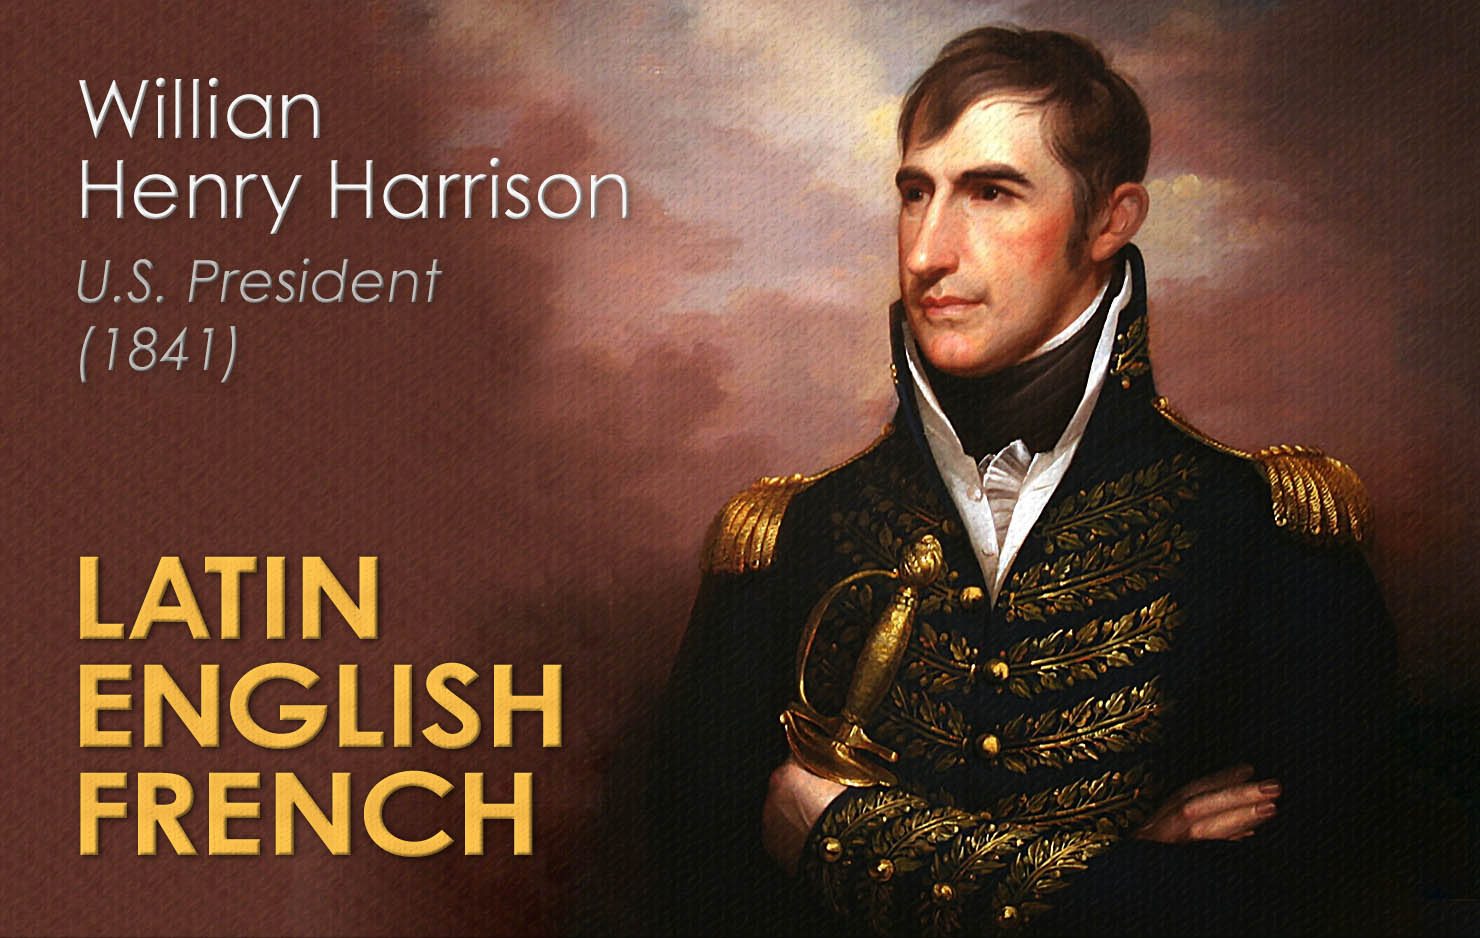 William Henry Harrison spent a considerable time learning Latin to aid in his study of military history. He also learned a small amount of French.